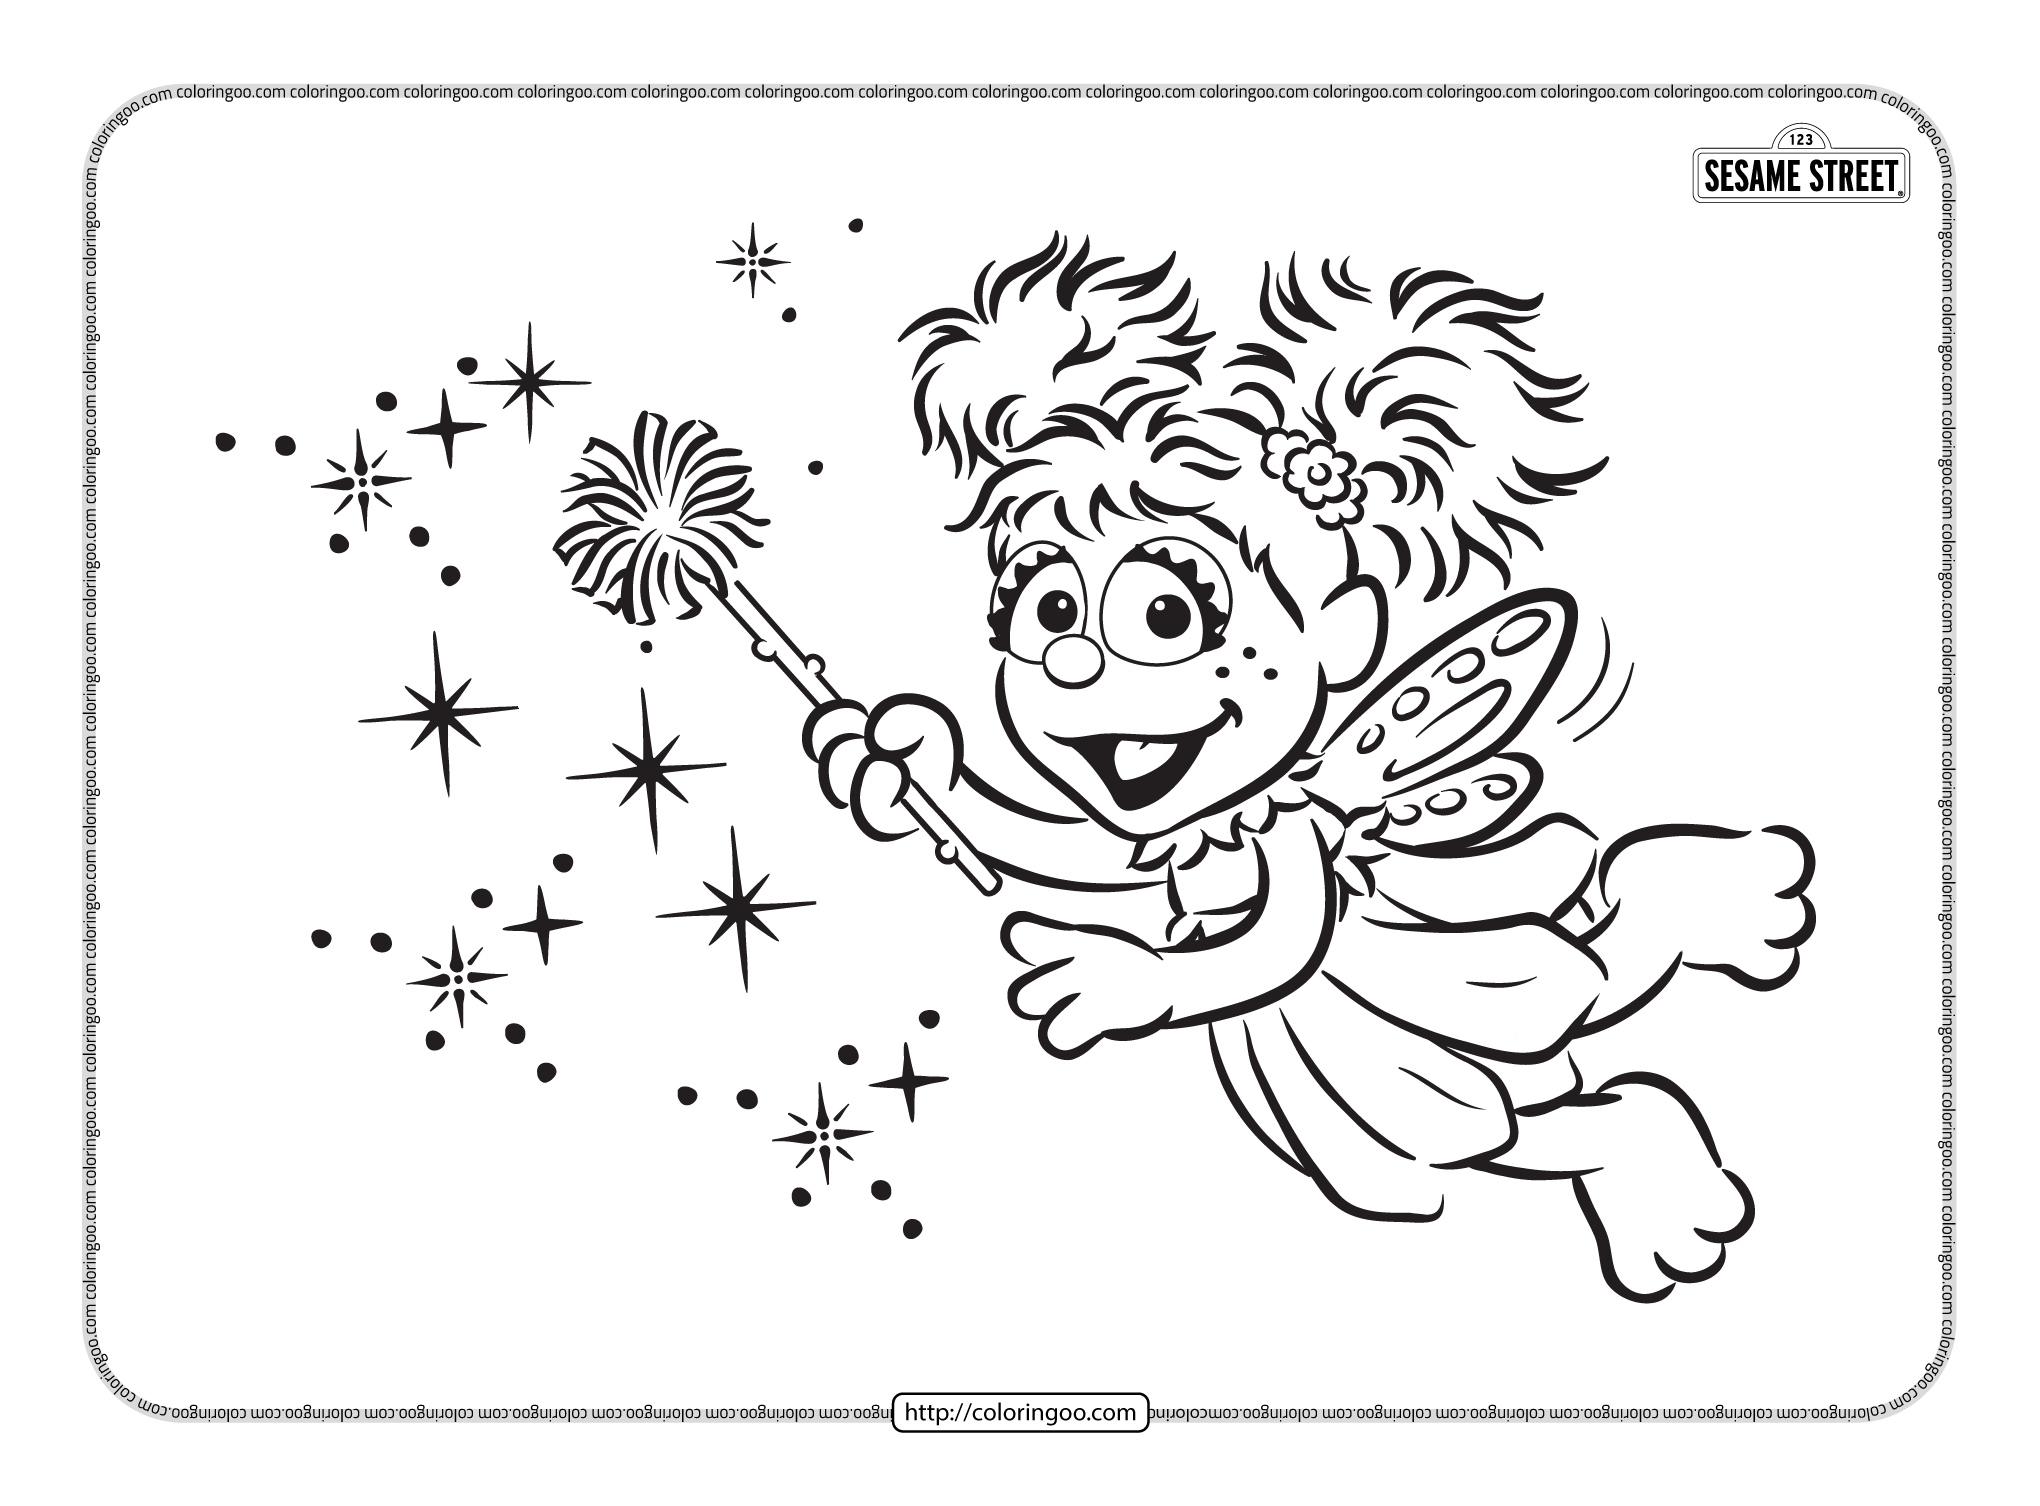 sesame street pdf coloring pages